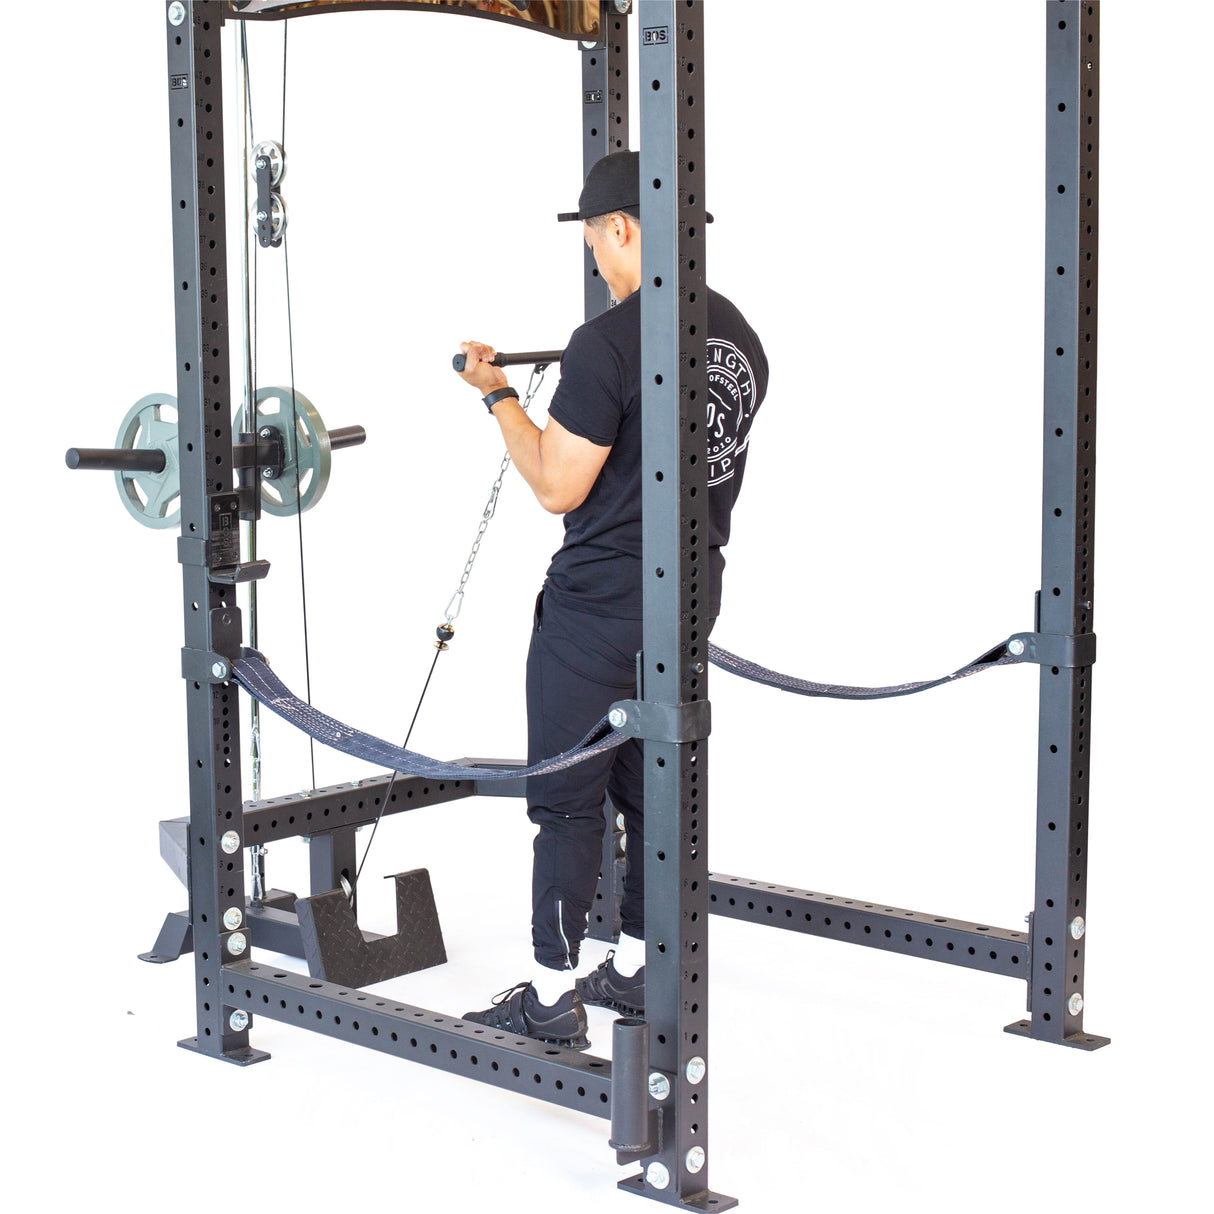 Male athlete doing standing cable row exercise using Plate-Loaded Lat Pulldown & Low Row Rack Attachment - Hydra